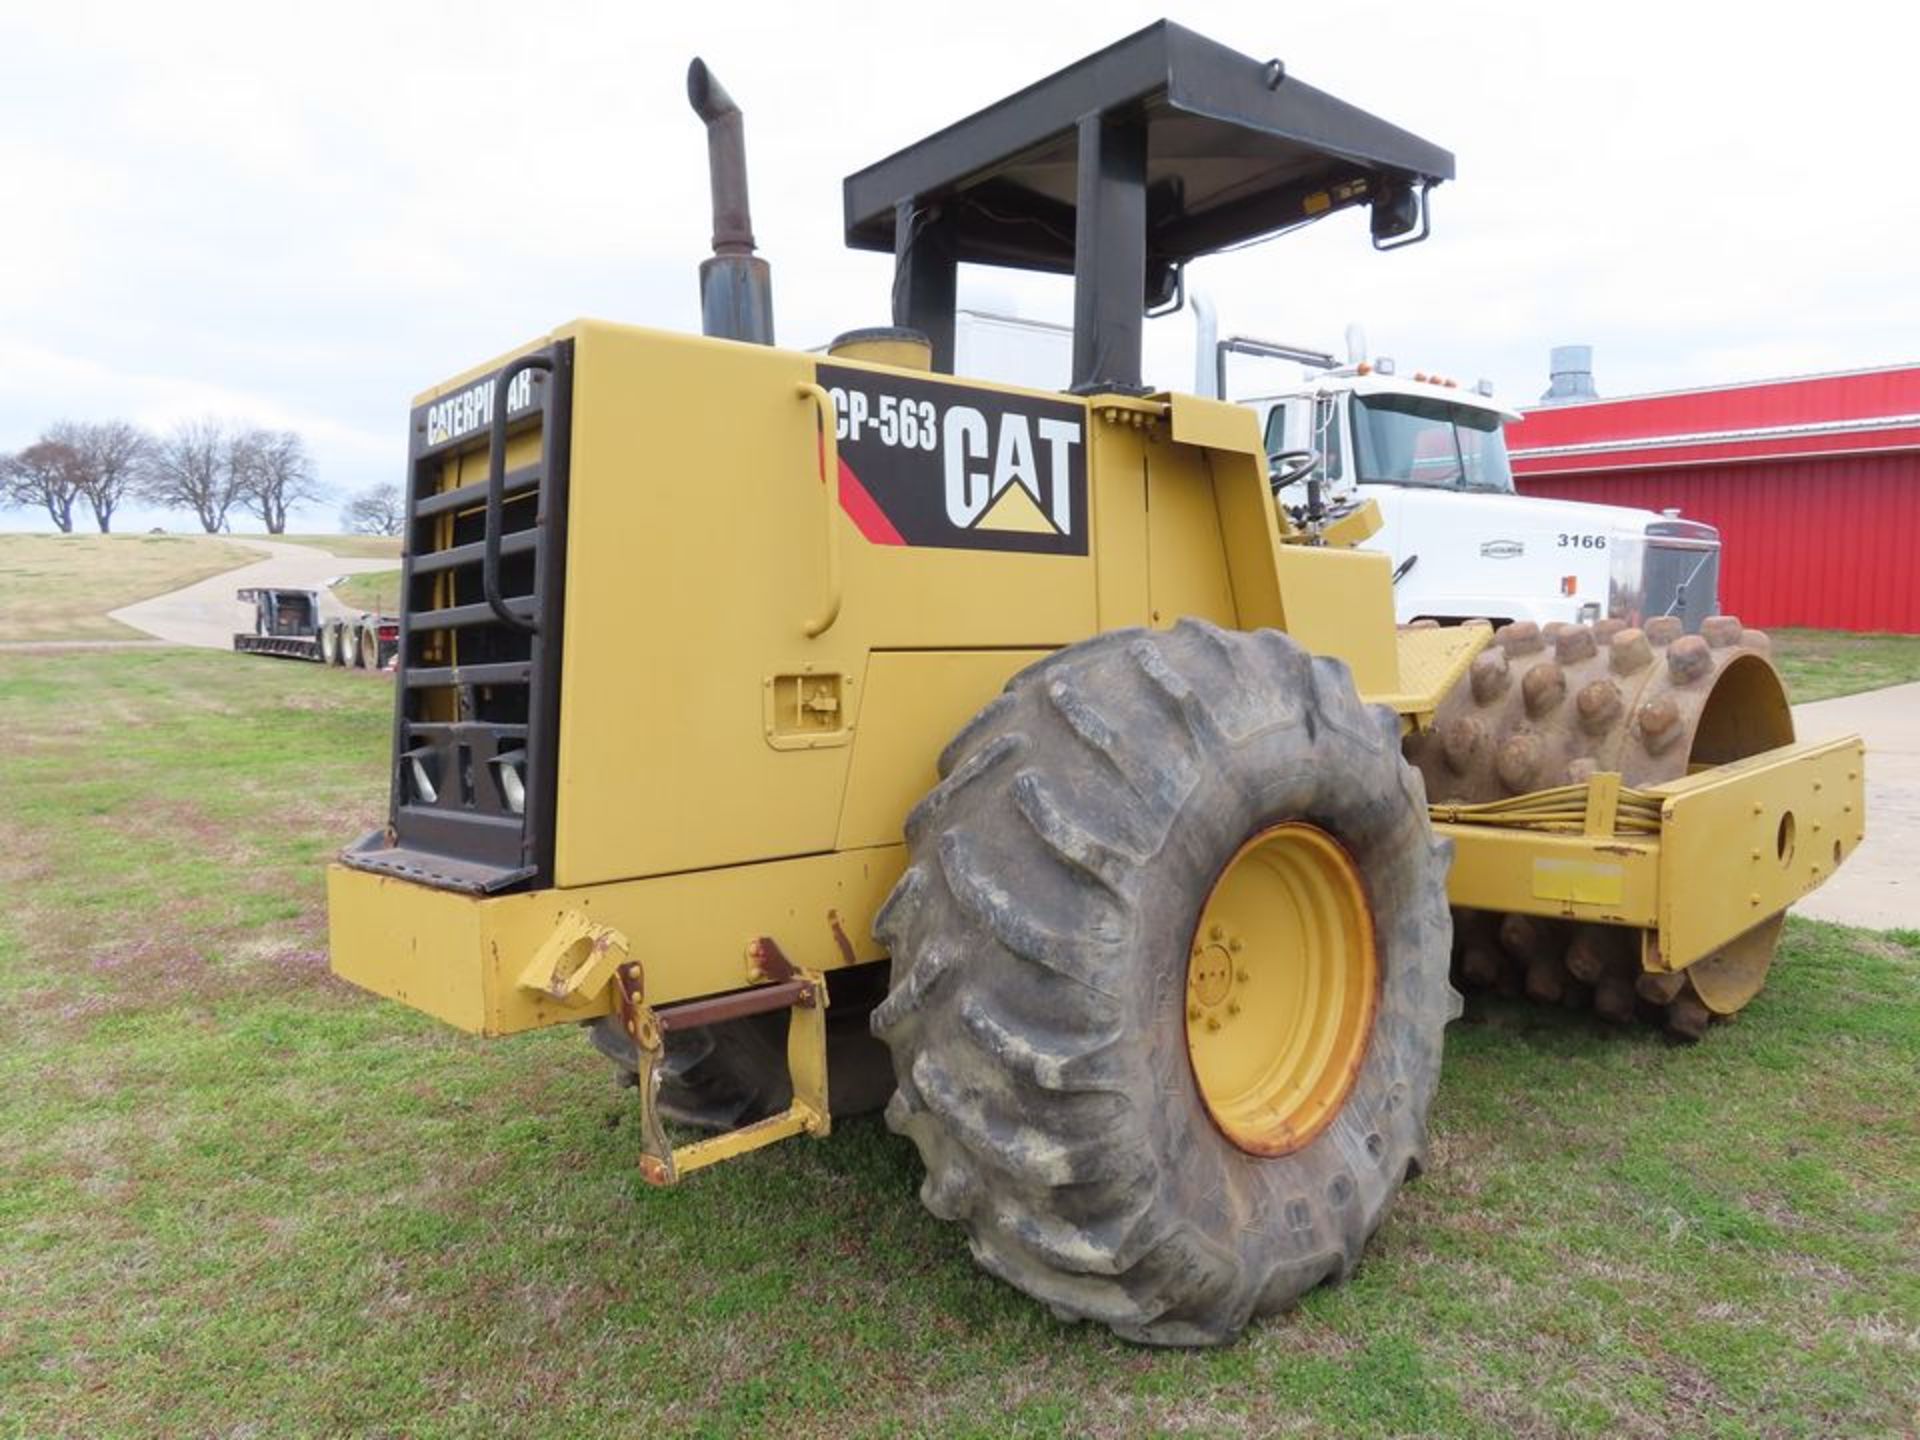 1991 CATERPILLAR VIBRATORY COMPACTOR, M# CP-563, S/N 1YJ00173, APPROX. 7,716 HOURS, ARTICULATED, 84" - Image 3 of 4